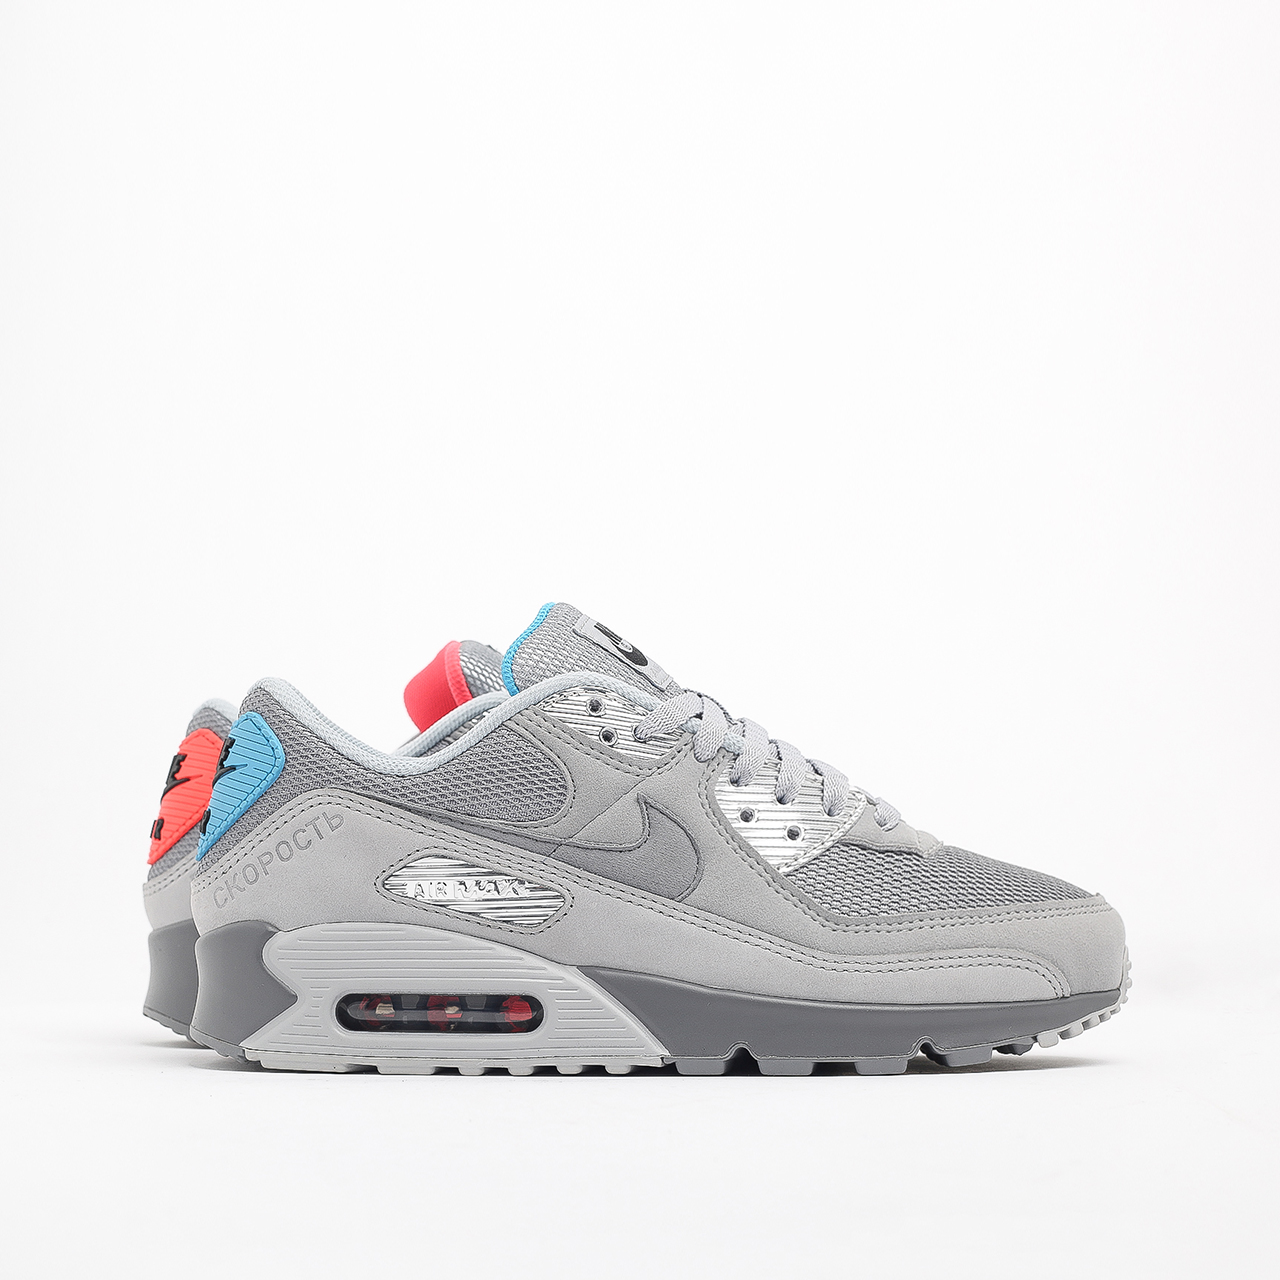 Nike AIRMAX 90 Moscow